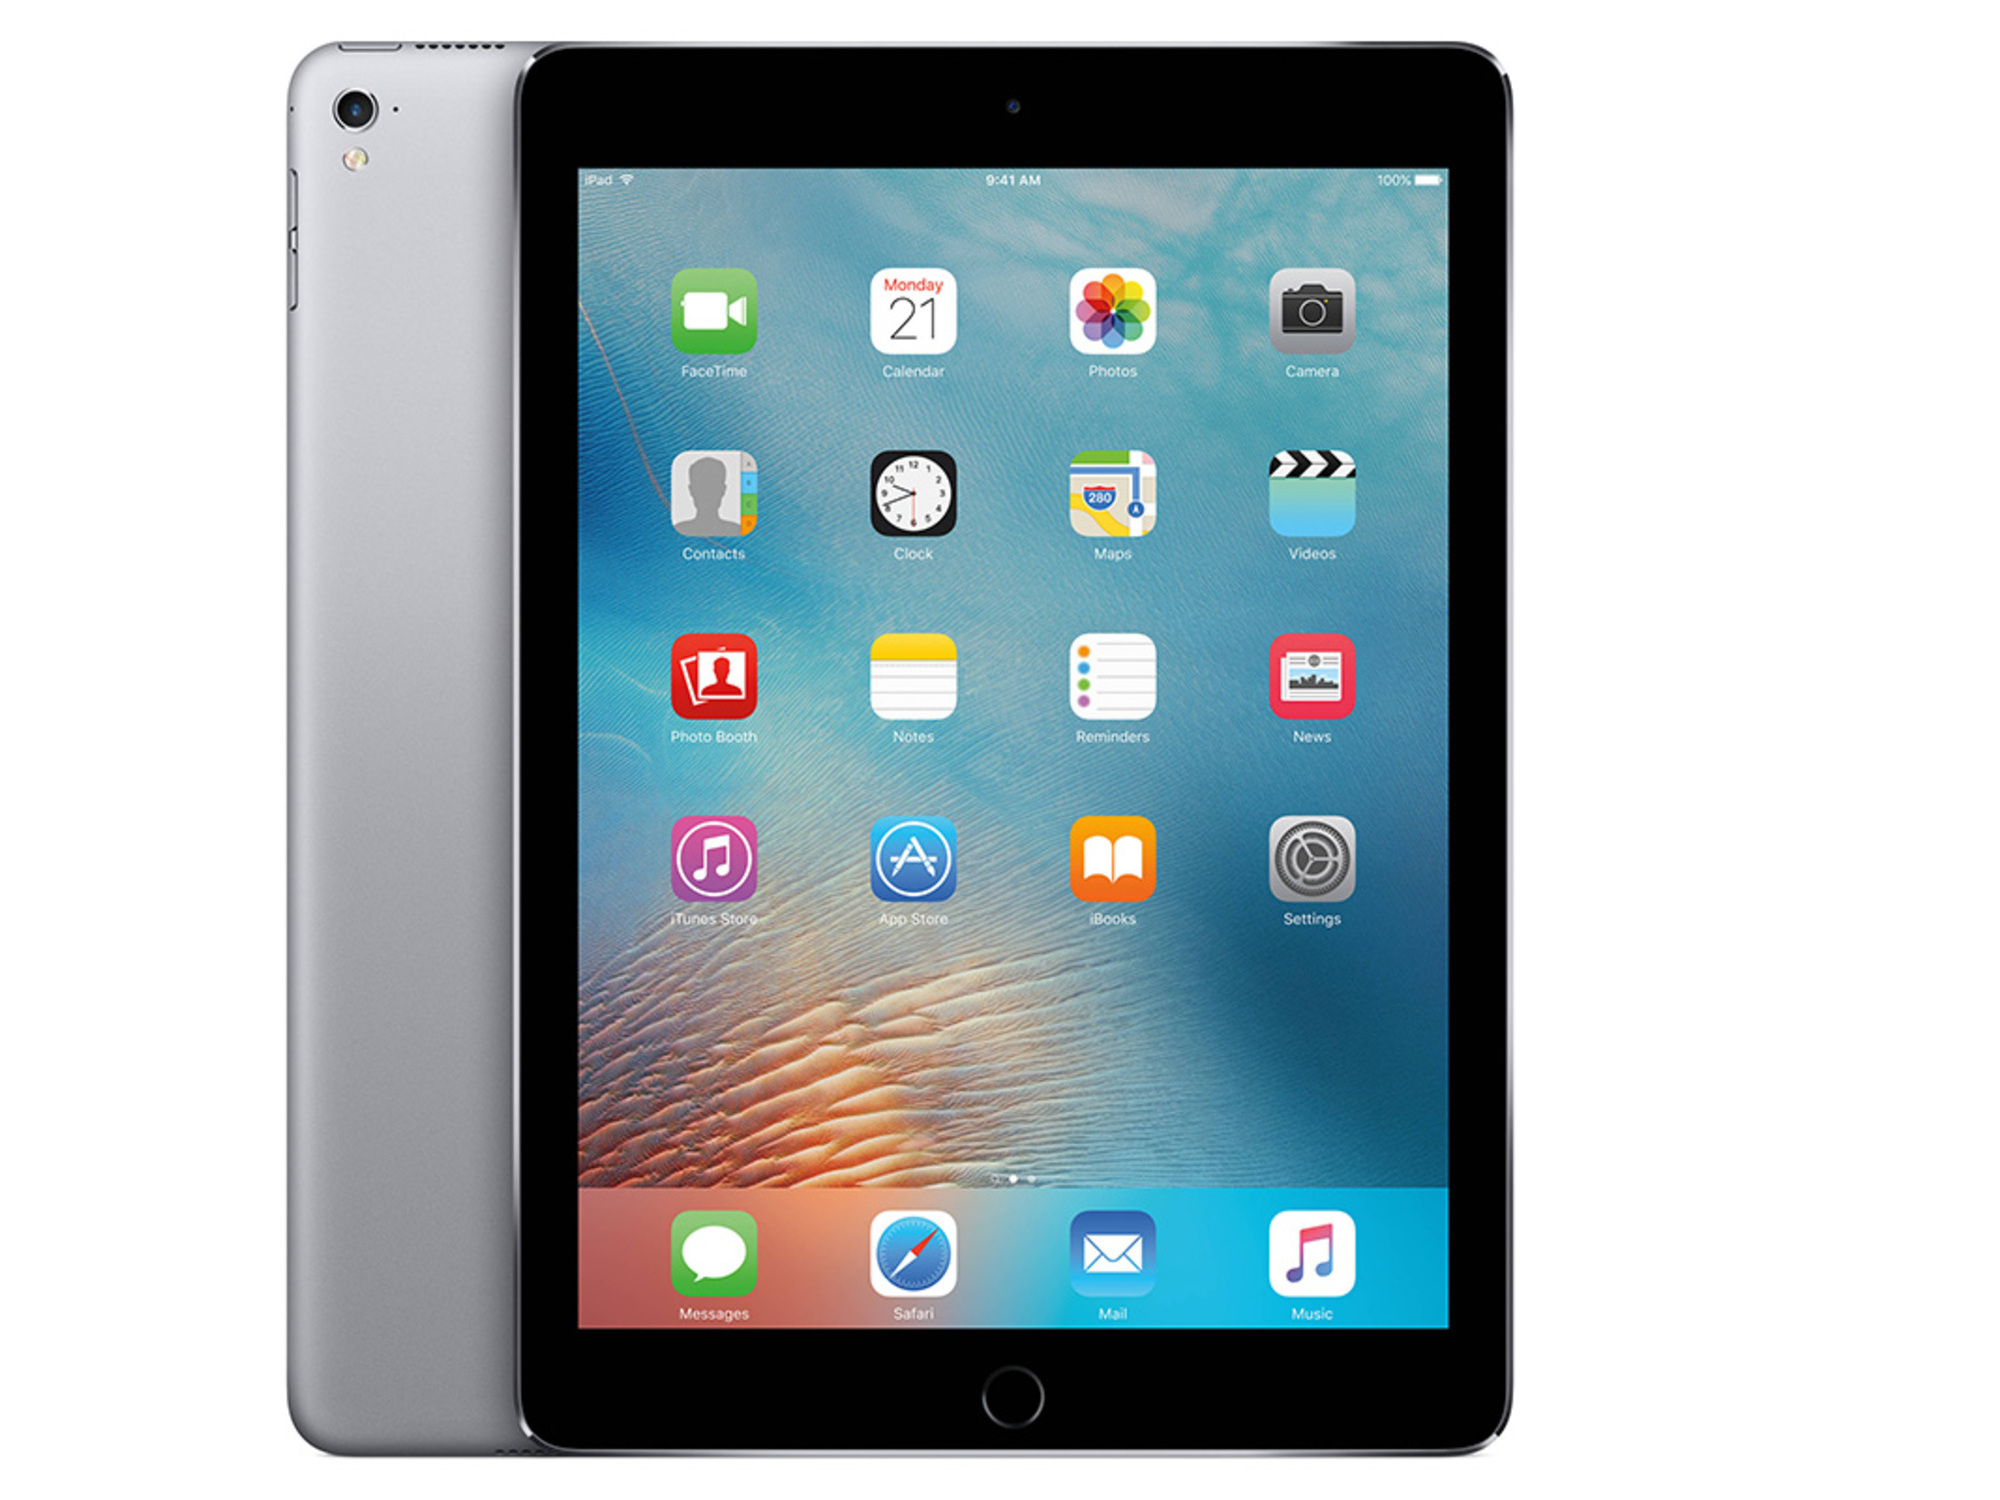 Get this refurbished iPad for our lowest price yet